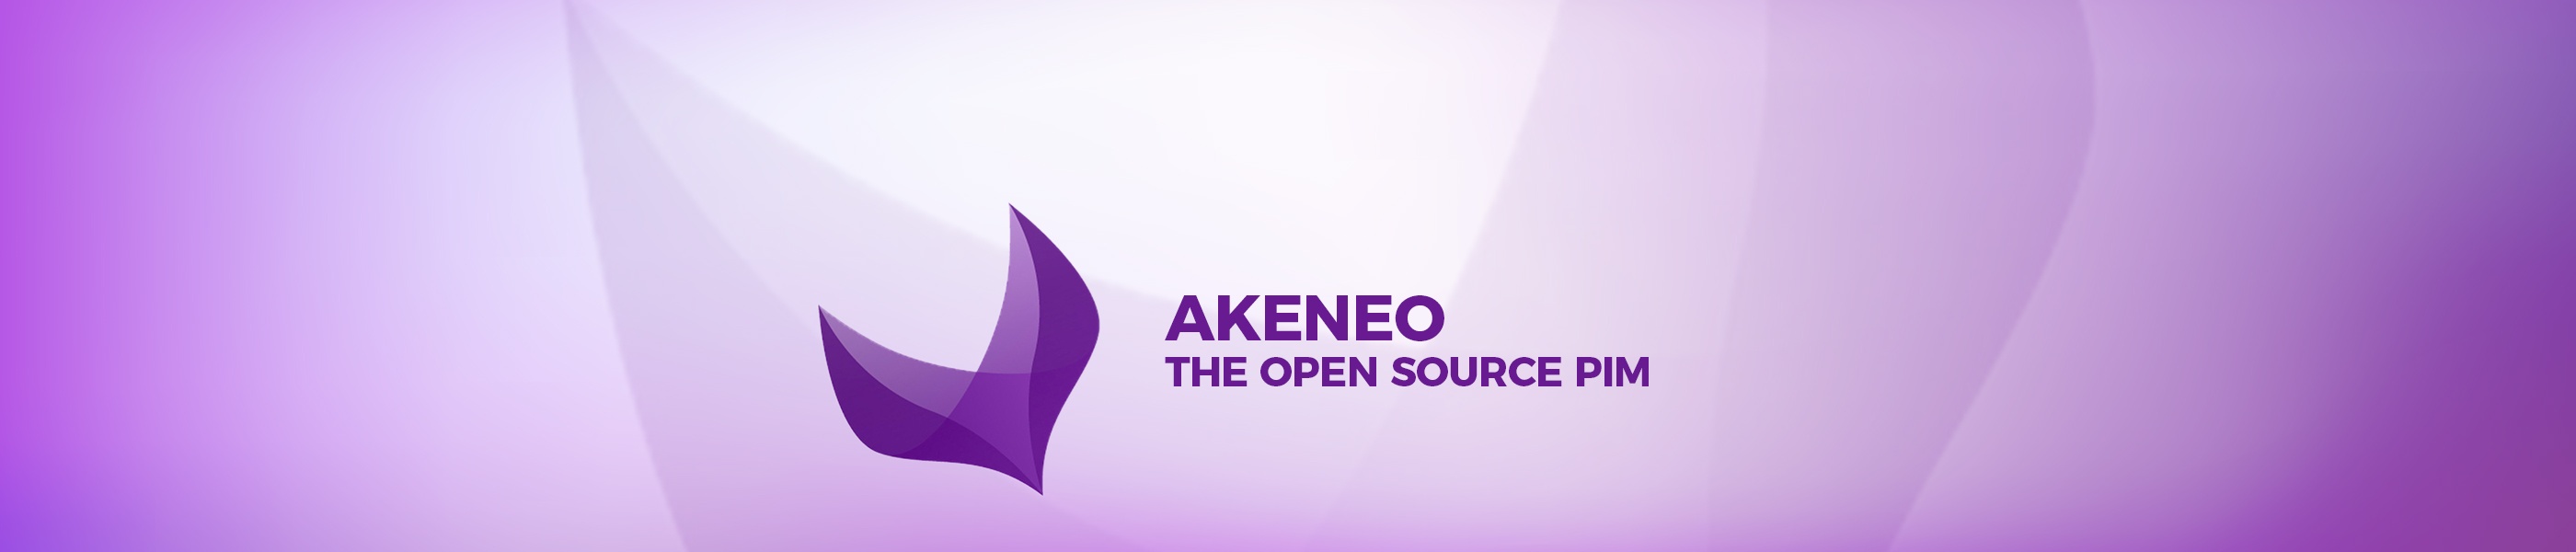 Akeneo PIM: PRODUCT DATA MANAGEMENT for e-commerce and Marketplaces